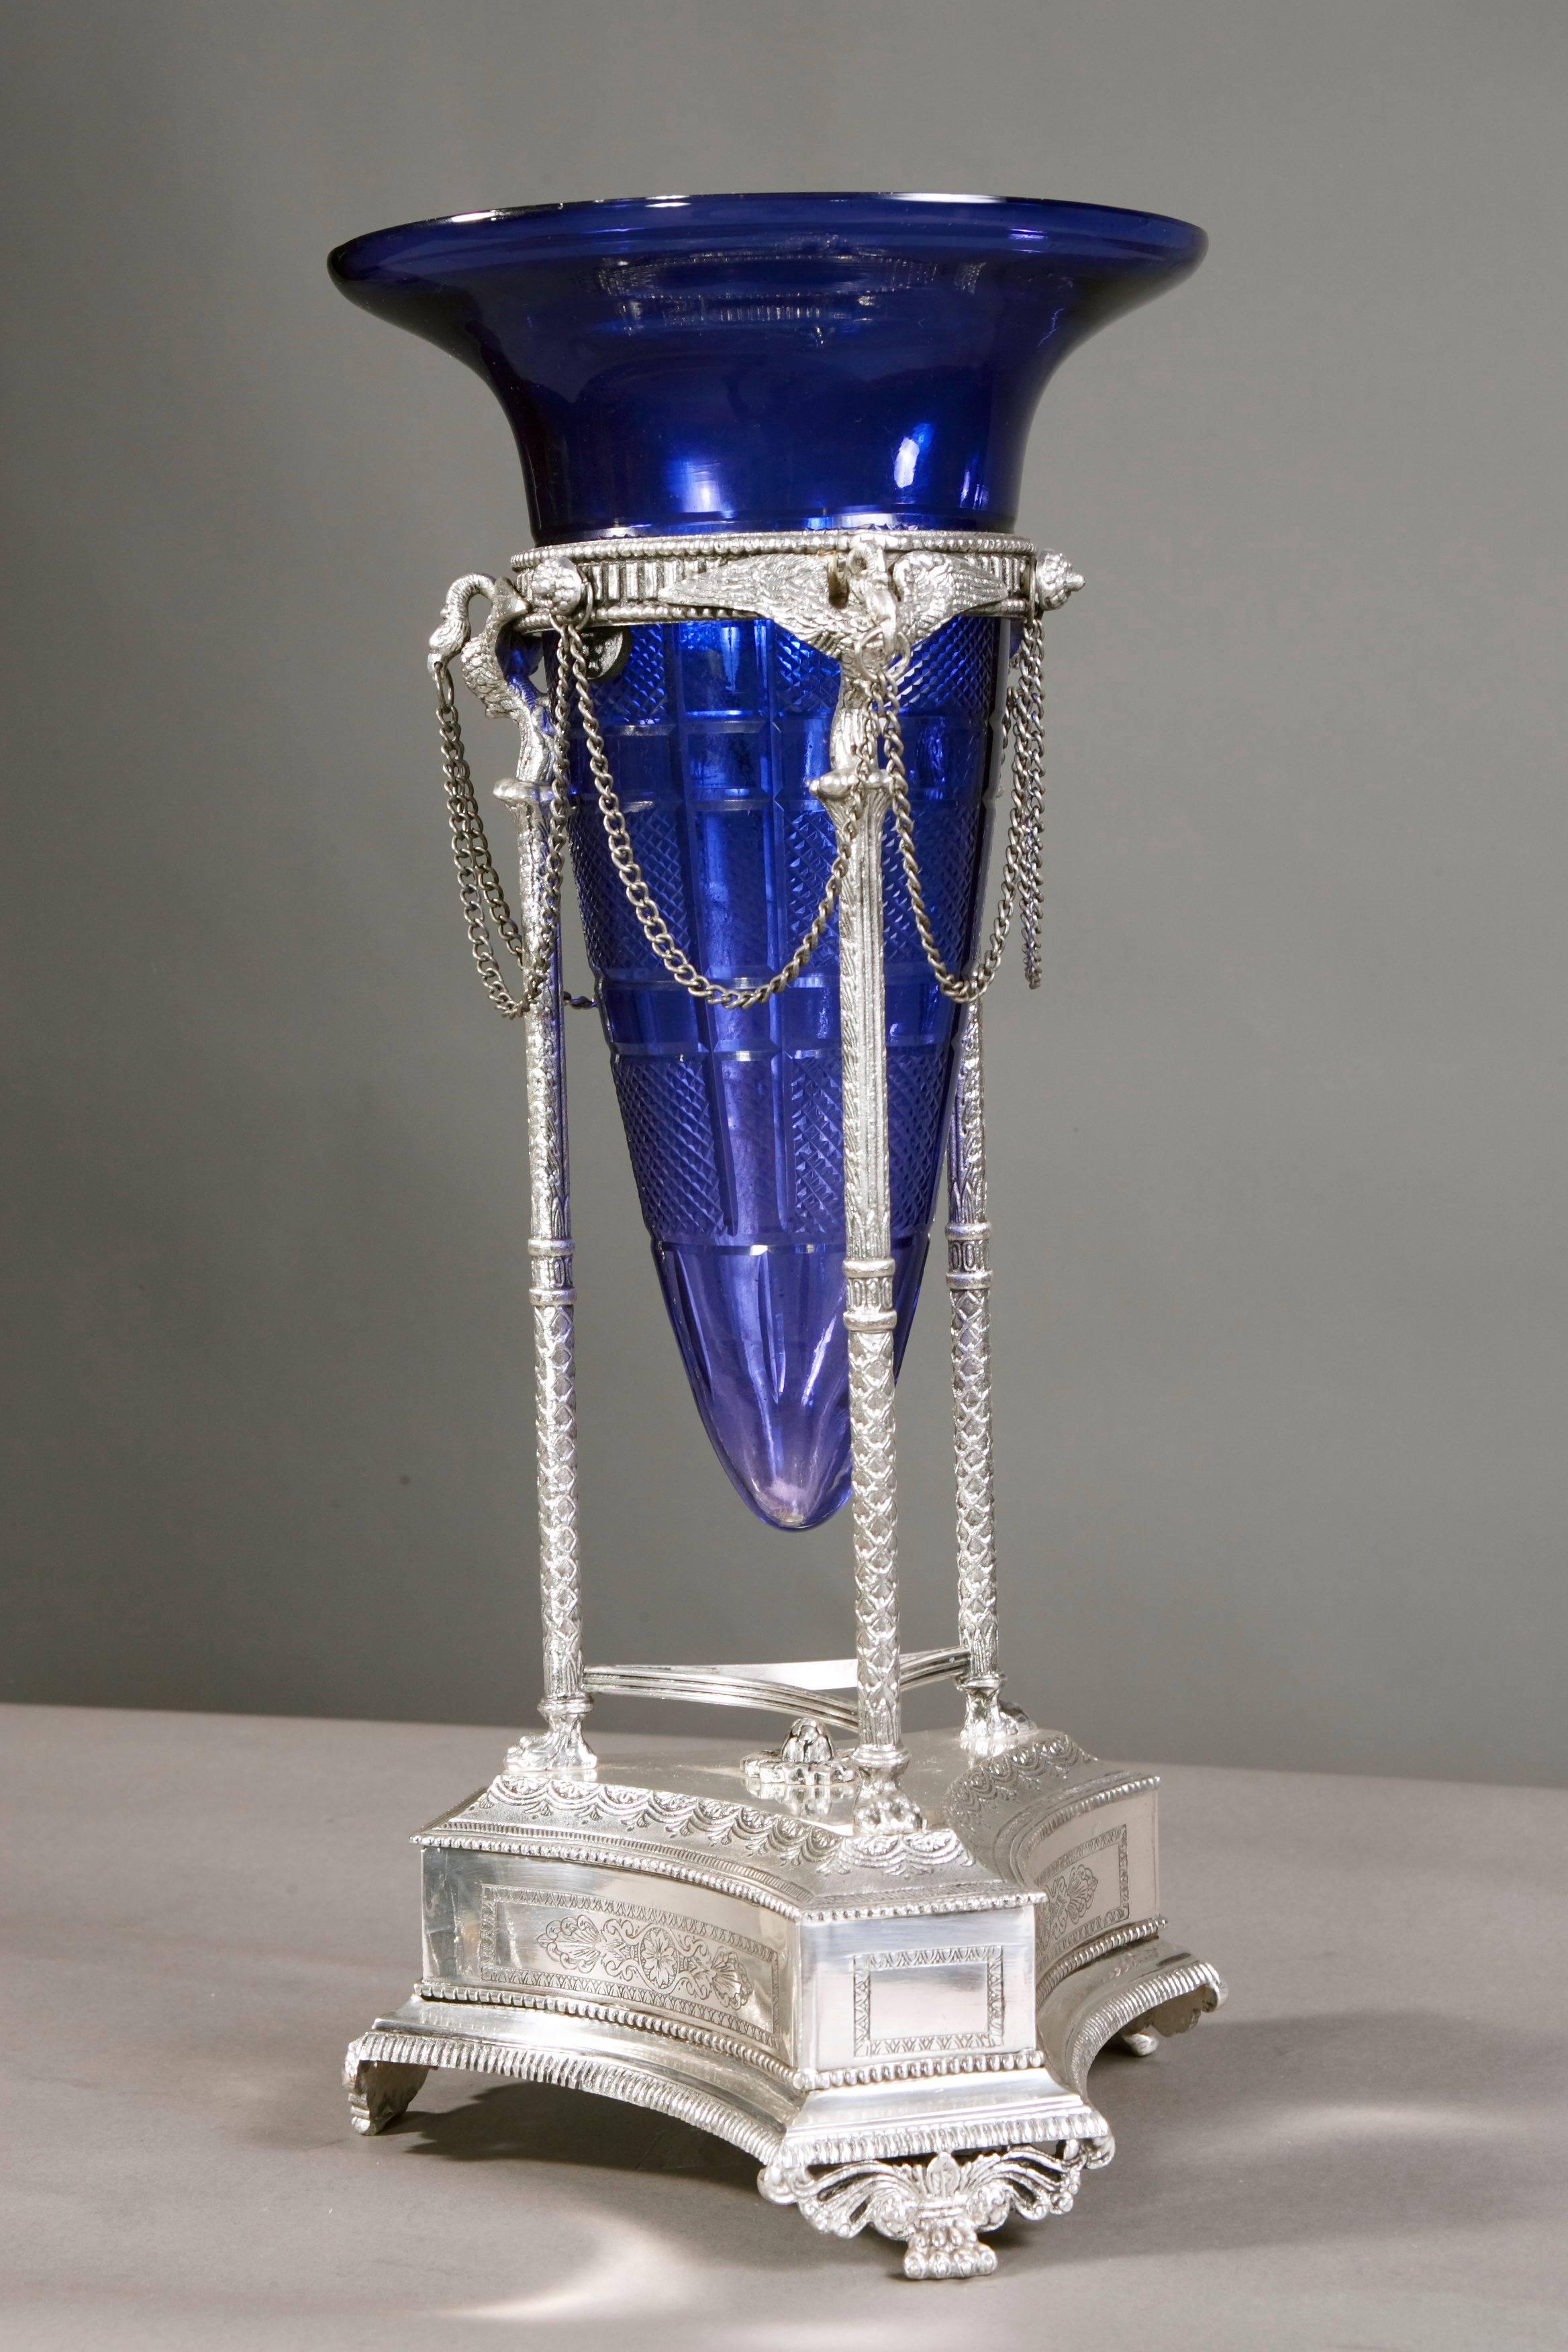 On three-legged, curved plinth on three flared feet with leaf-neck. Three column shafts with fully sculptural, finely chiselled swans. Funnel-shaped insert made of sapphire-blue glass with rich cut decoration. Everything from solid and antique